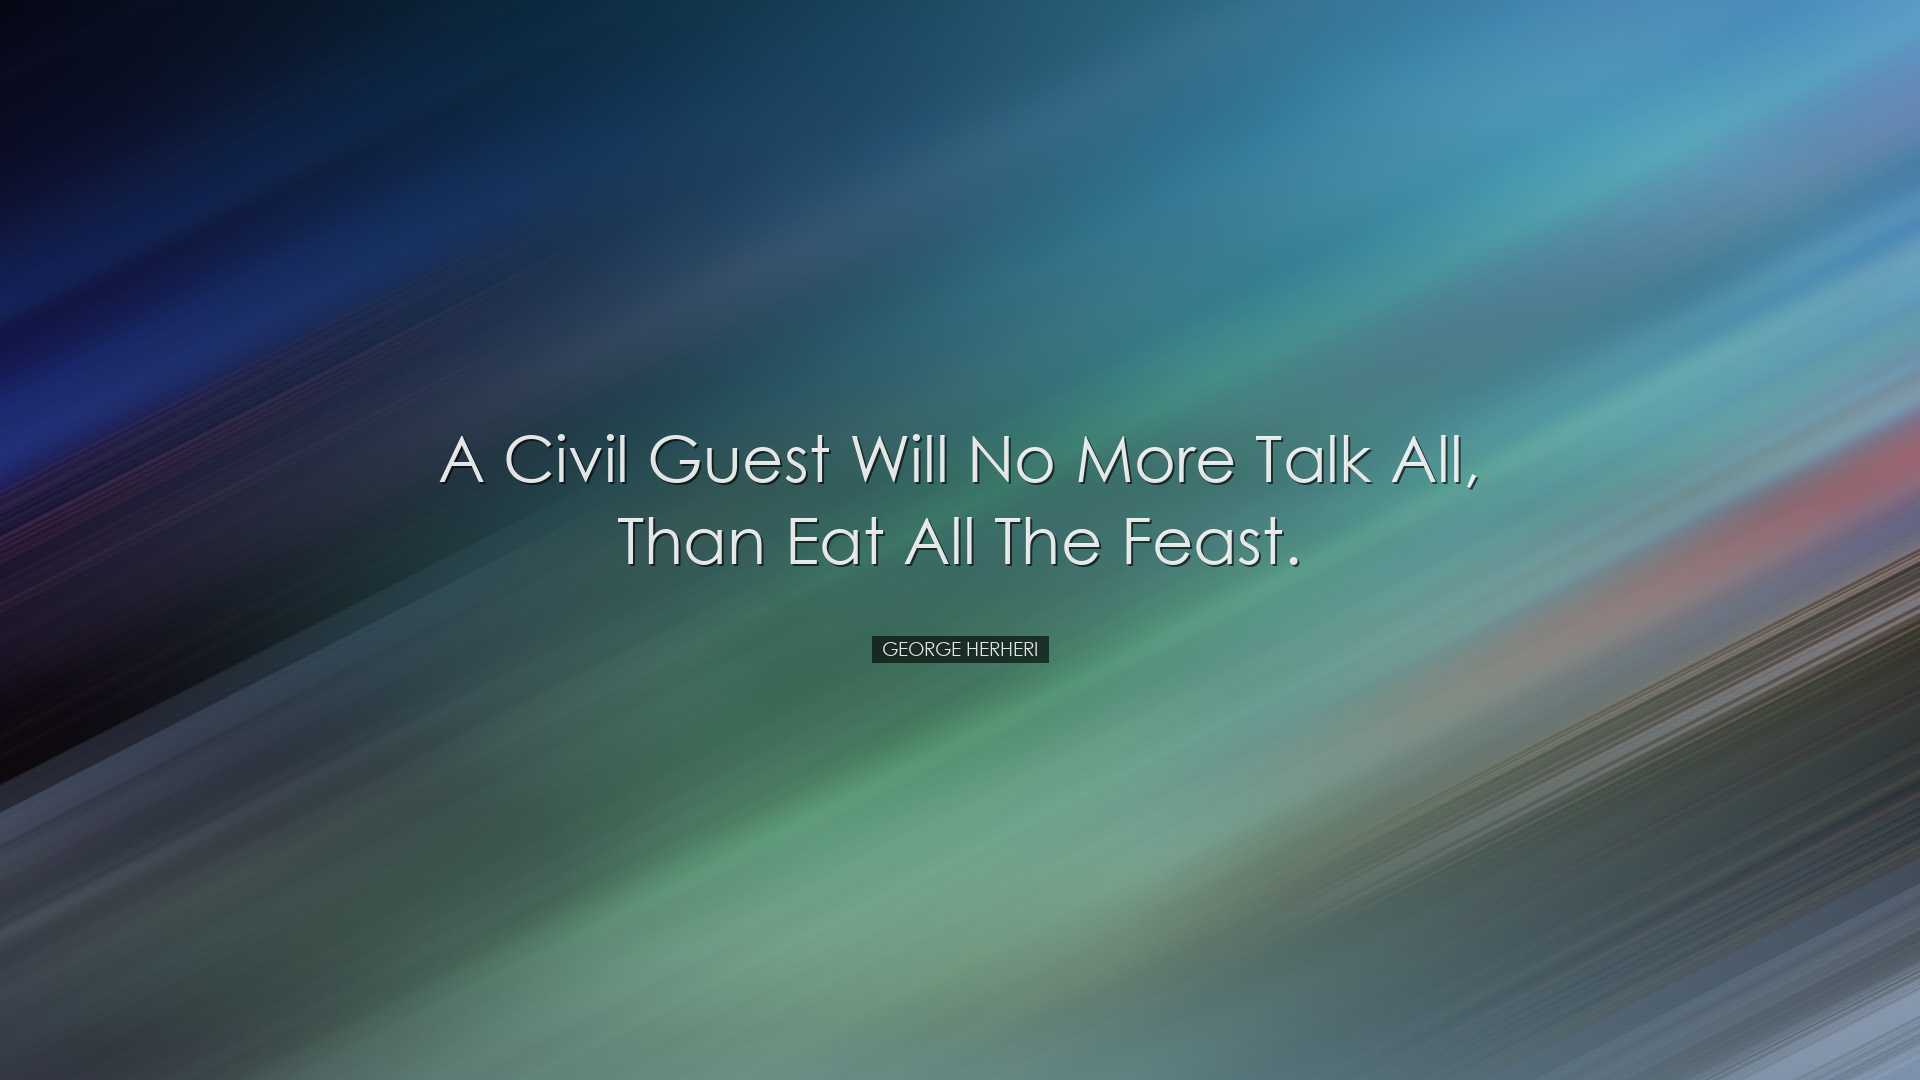 A civil guest will no more talk all, than eat all the feast. - Geo